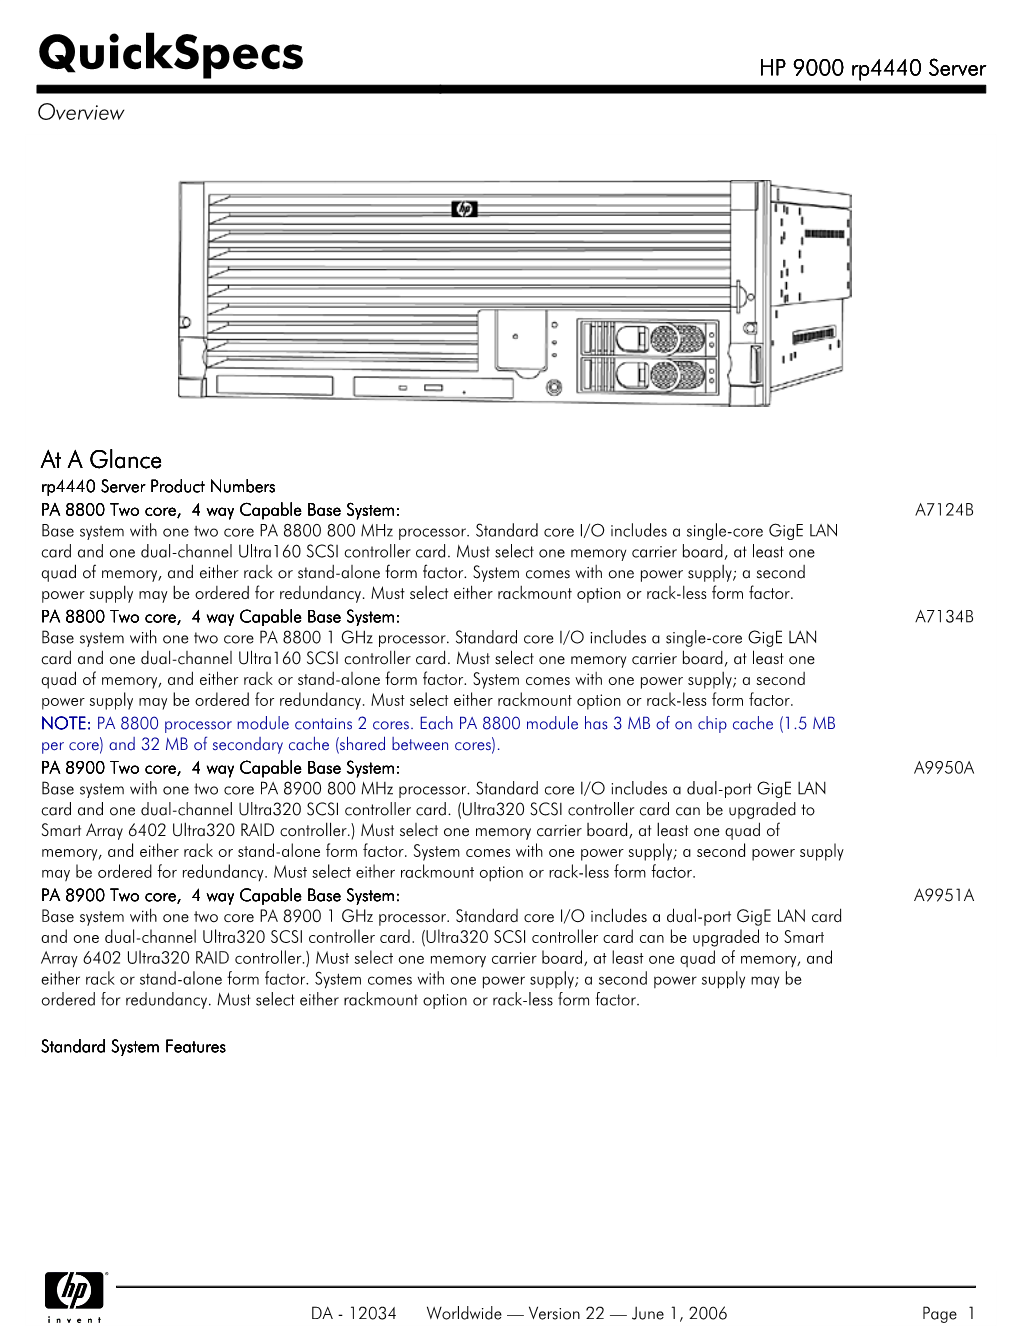 HP 9000 Rp4440 Server Overview